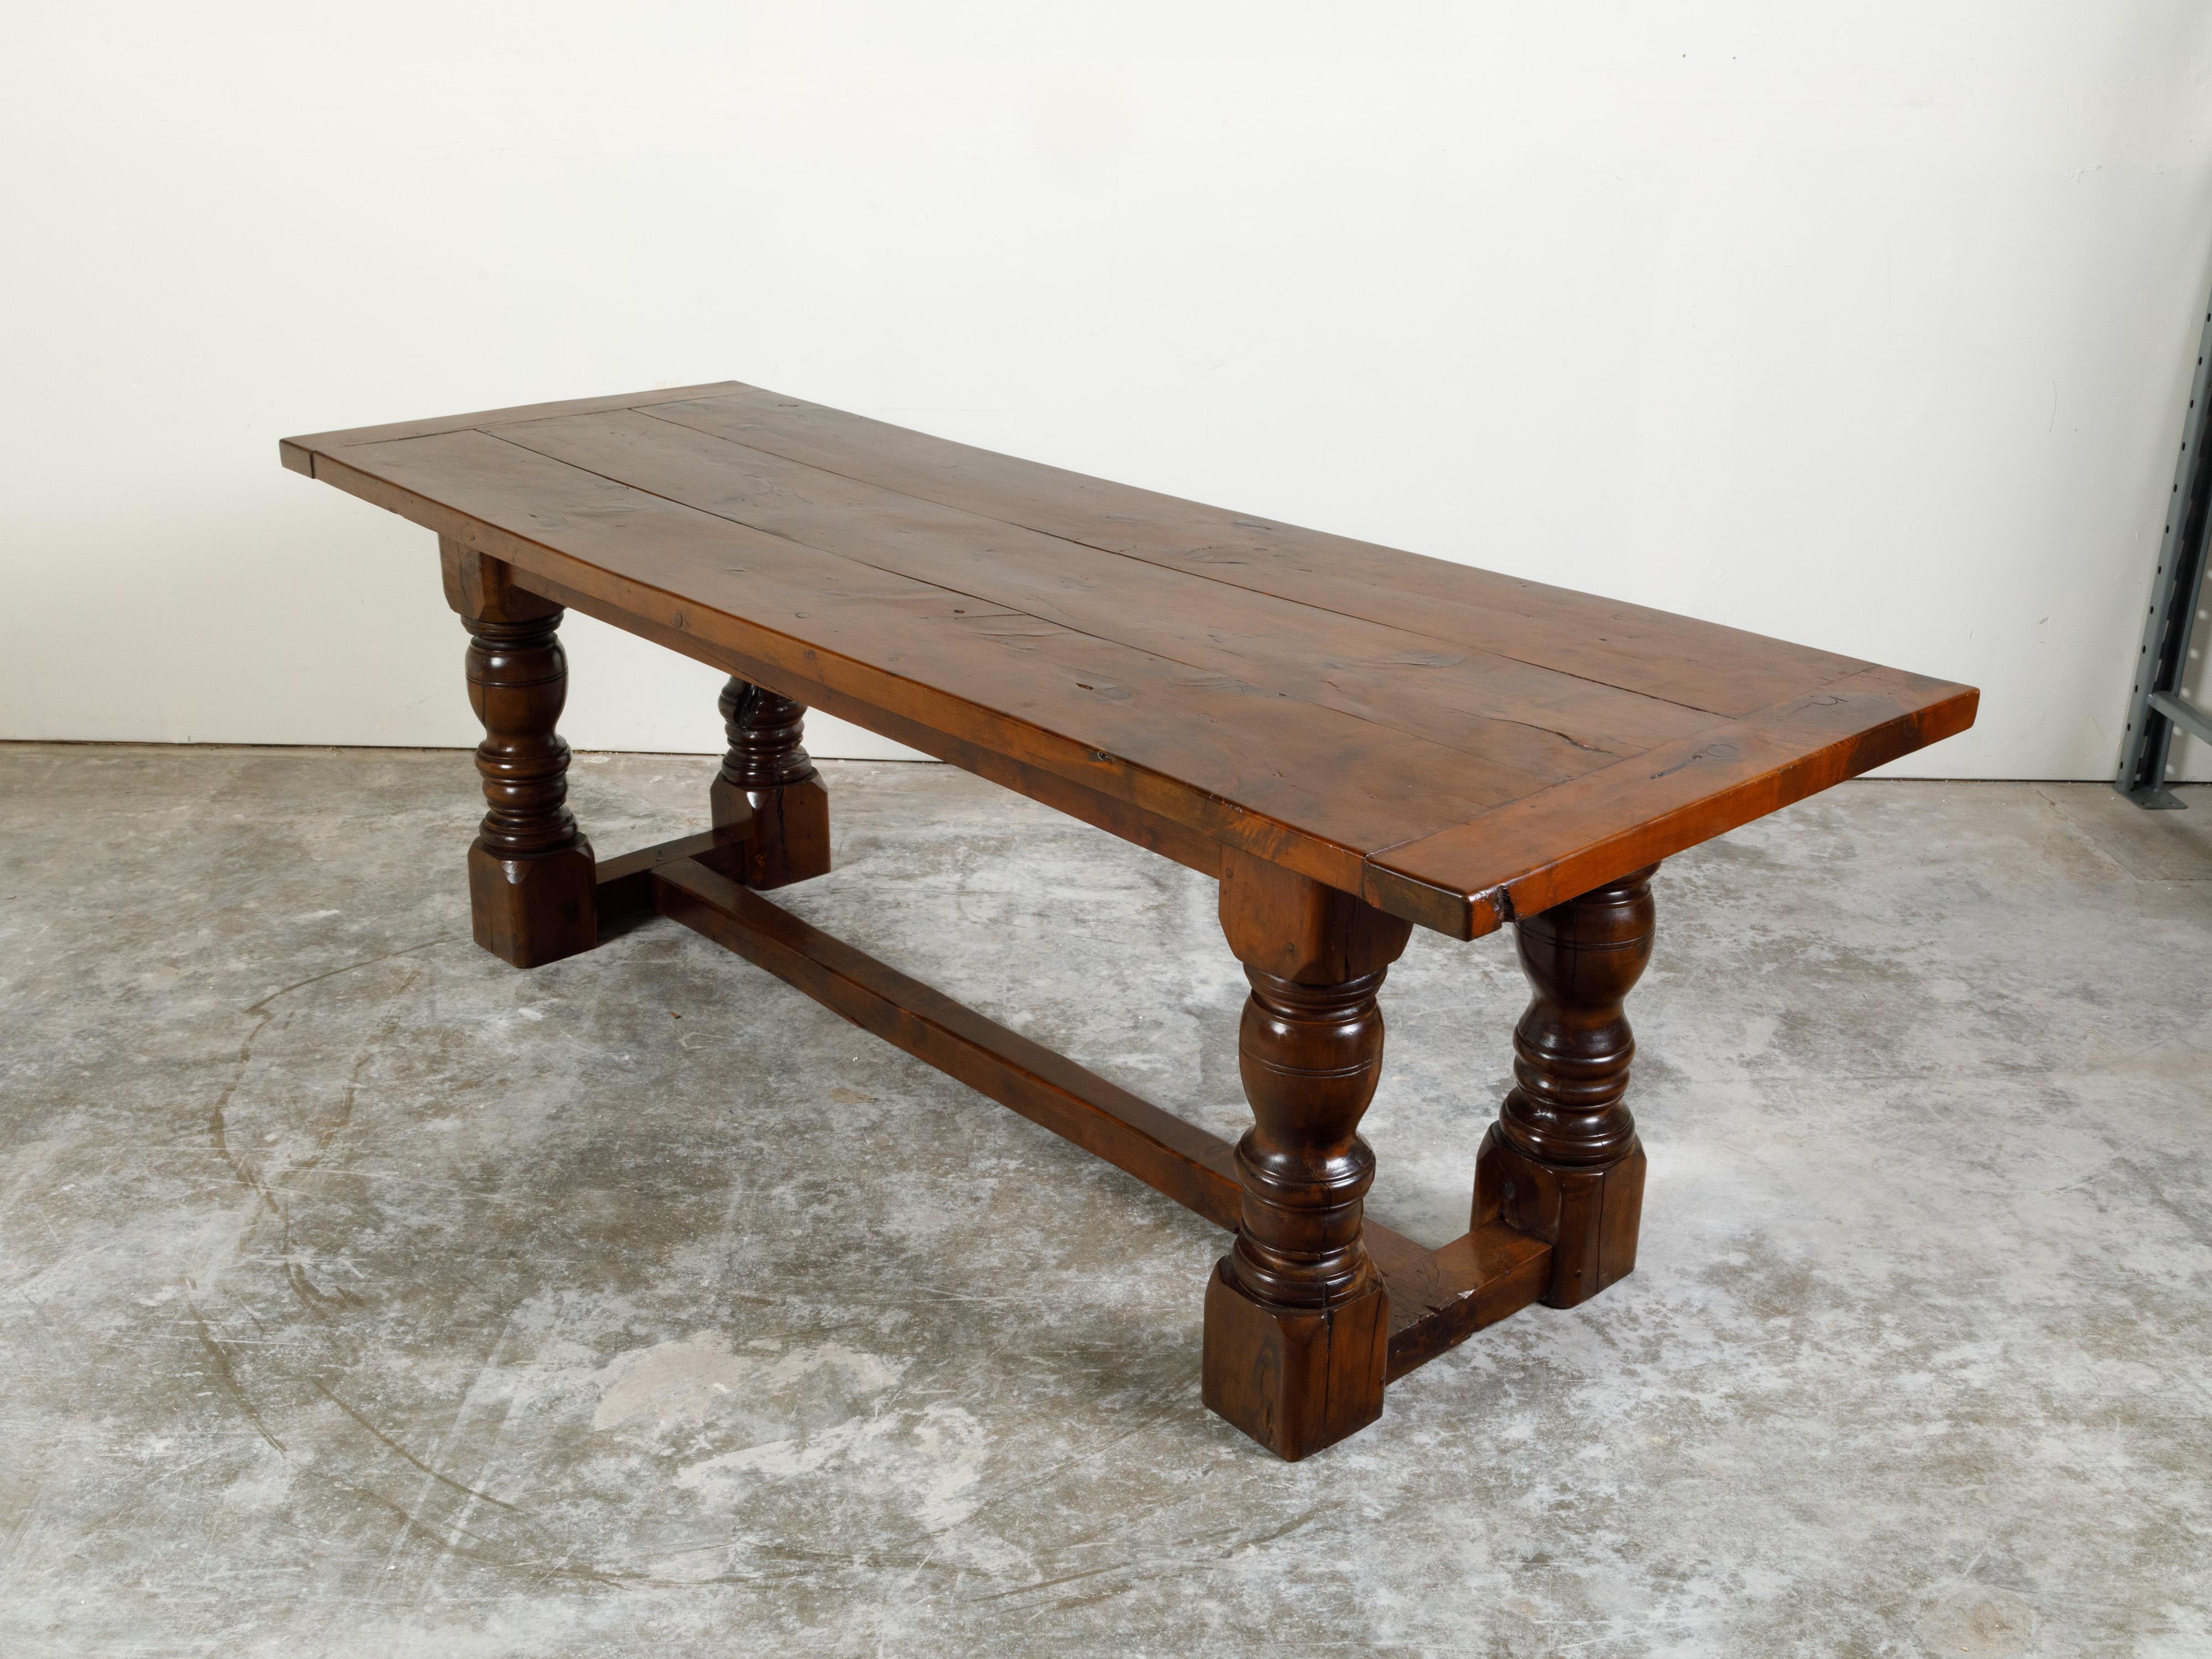 English 19th Century Walnut Dining Table with Turned Legs and H-Form Stretcher For Sale 5